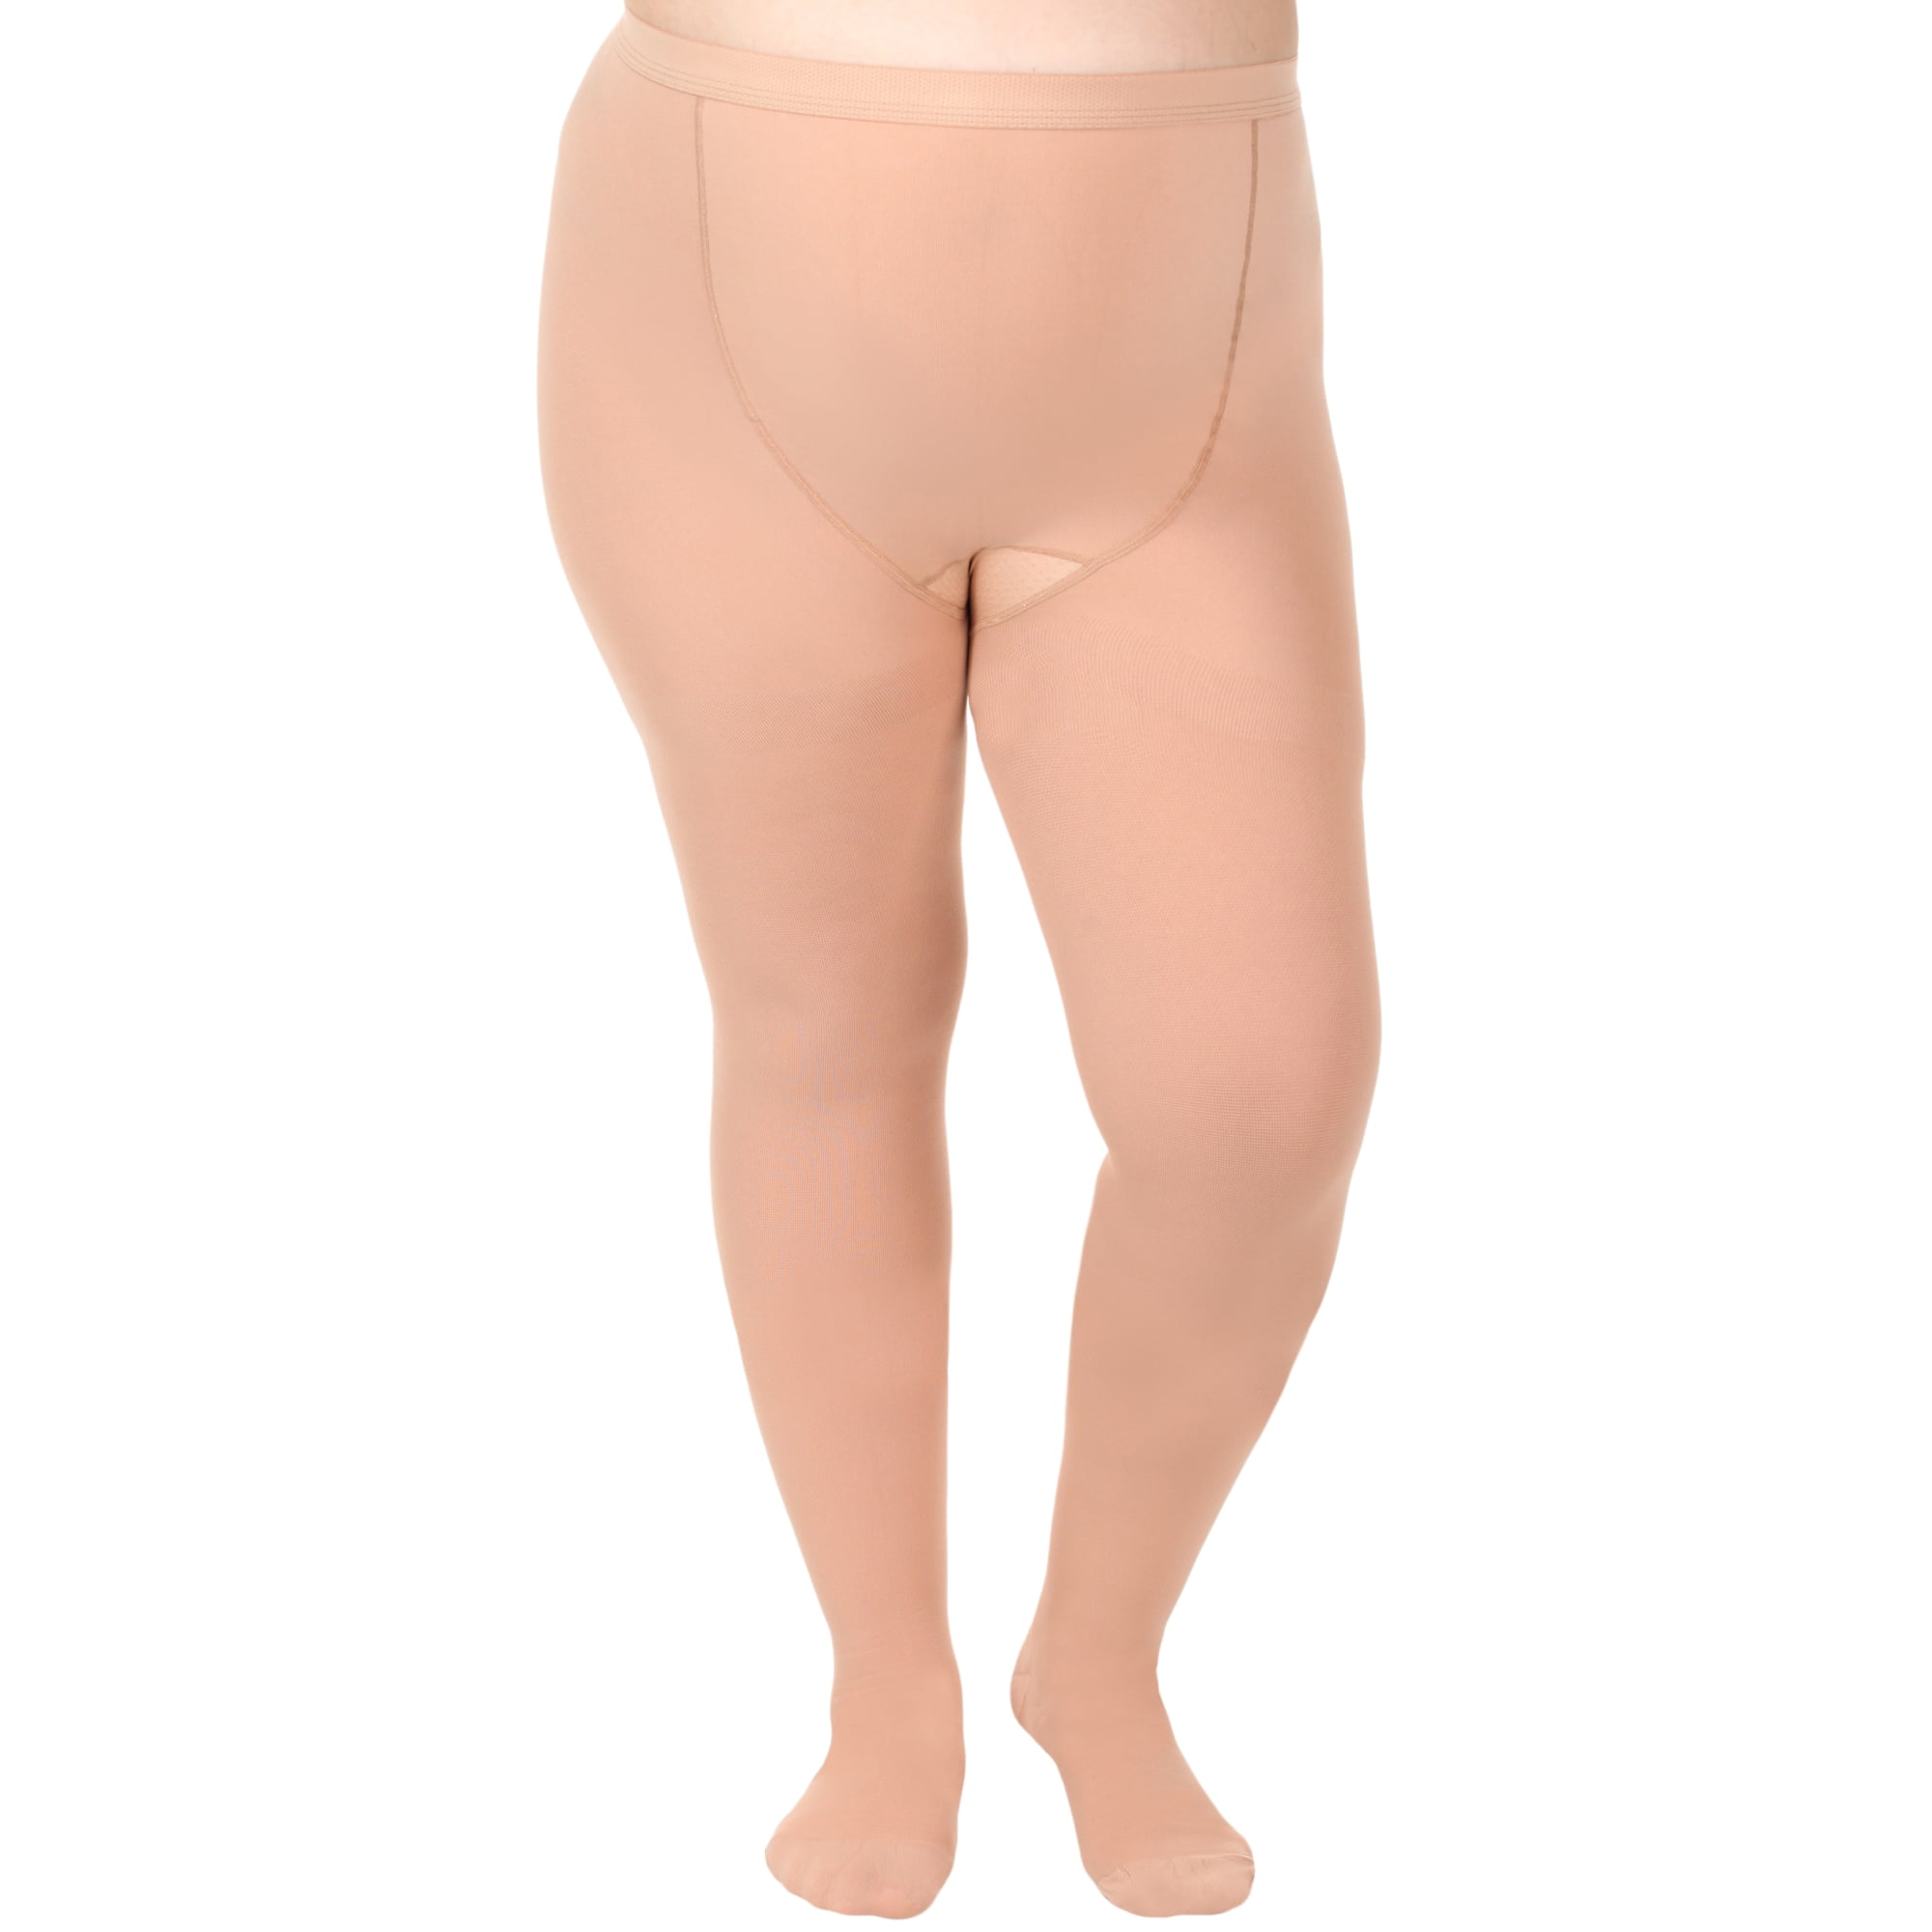 Maternity Compression Tights 20-30mmHg by Absolute Support - Beige, Medium  